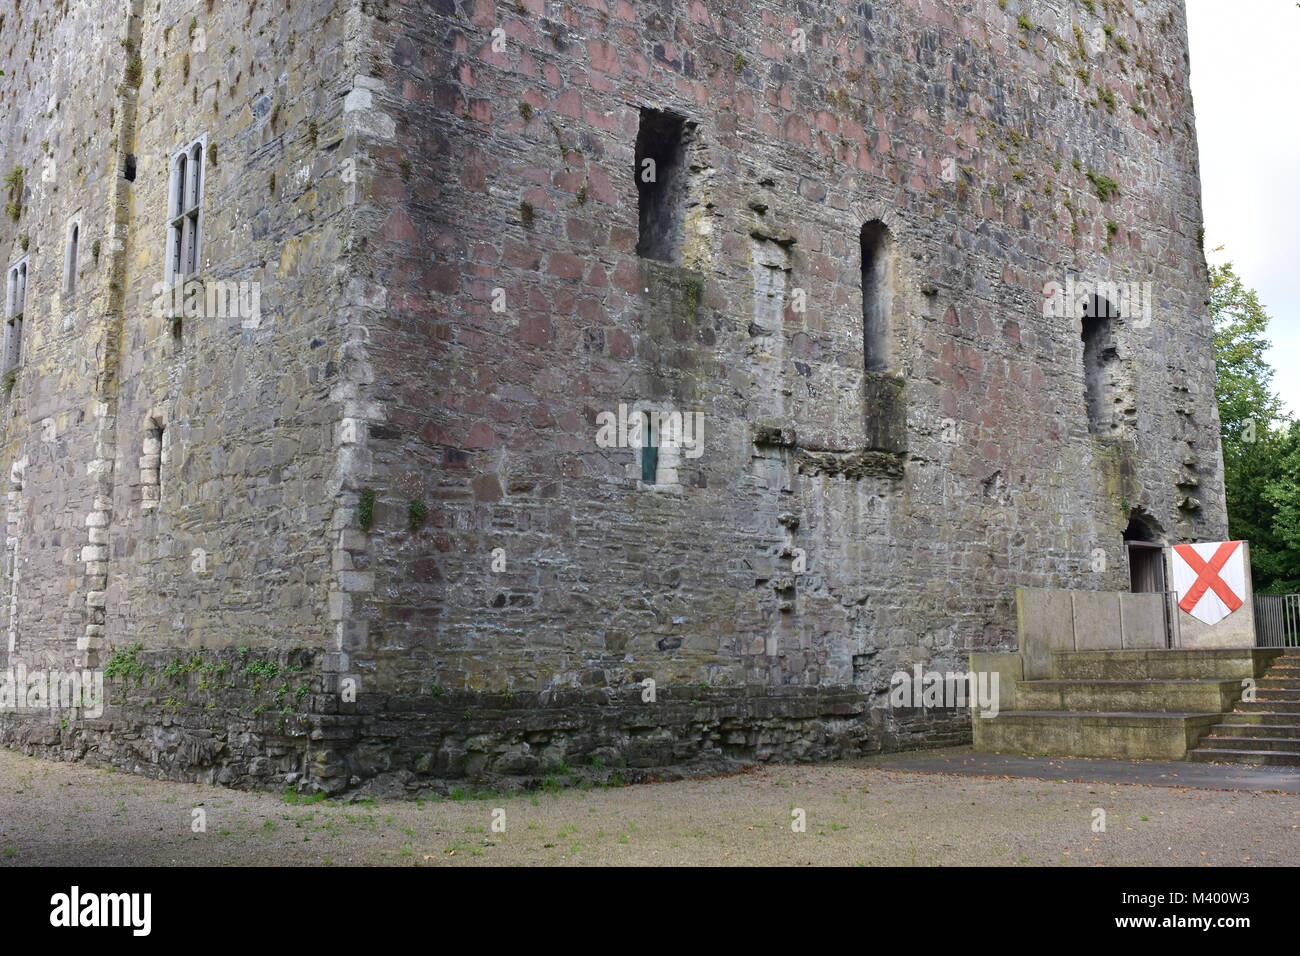 Conserved ruins of medieval stone 12th century castle in town of Maynooth in Ireland. Stock Photo